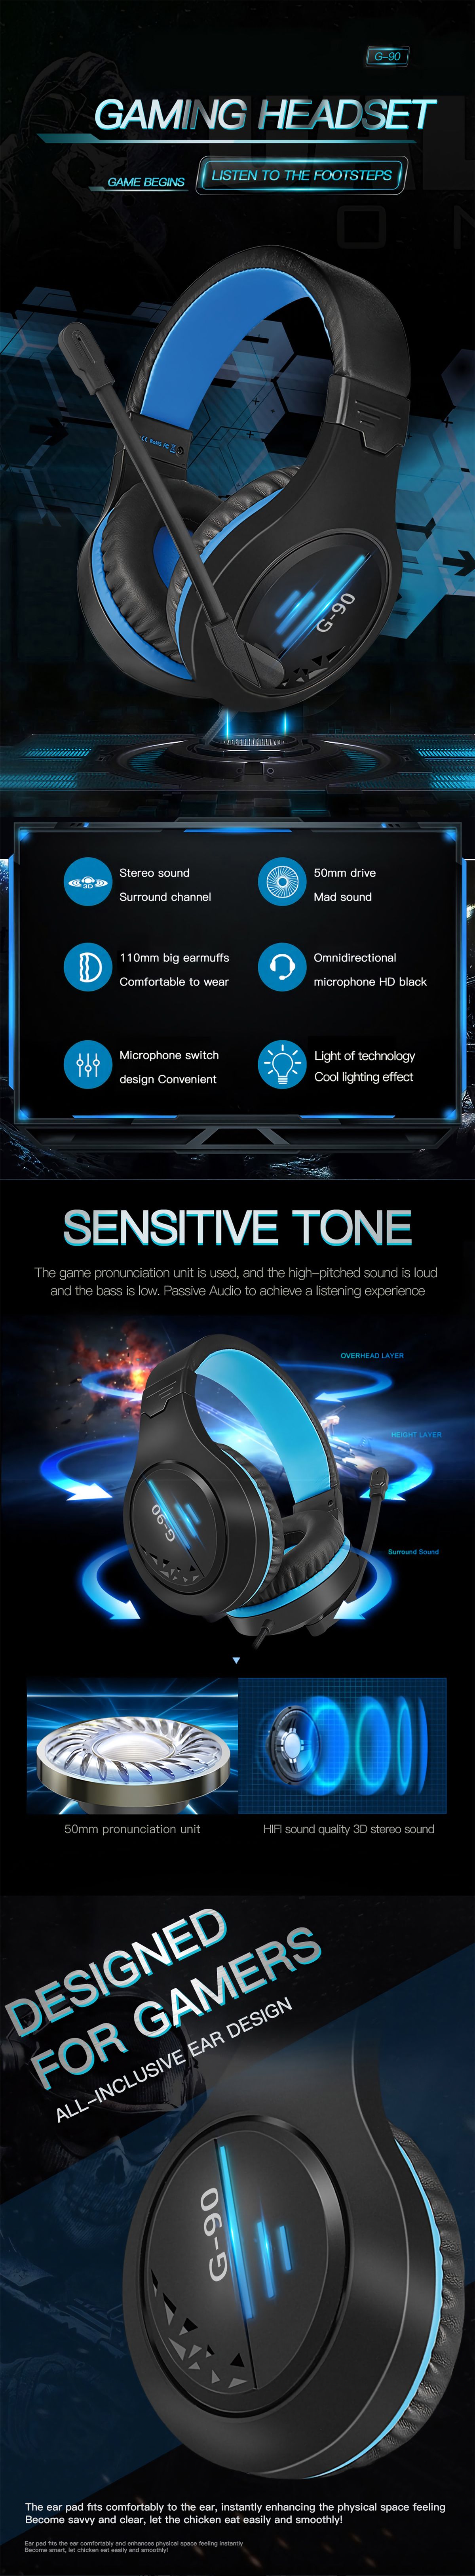 G90-Gaming-Headset-USB-35mm-Wired-Bass-Gaming-Headphone-Stereo-Video-Audio-Headphones-Earphone-with--1676266